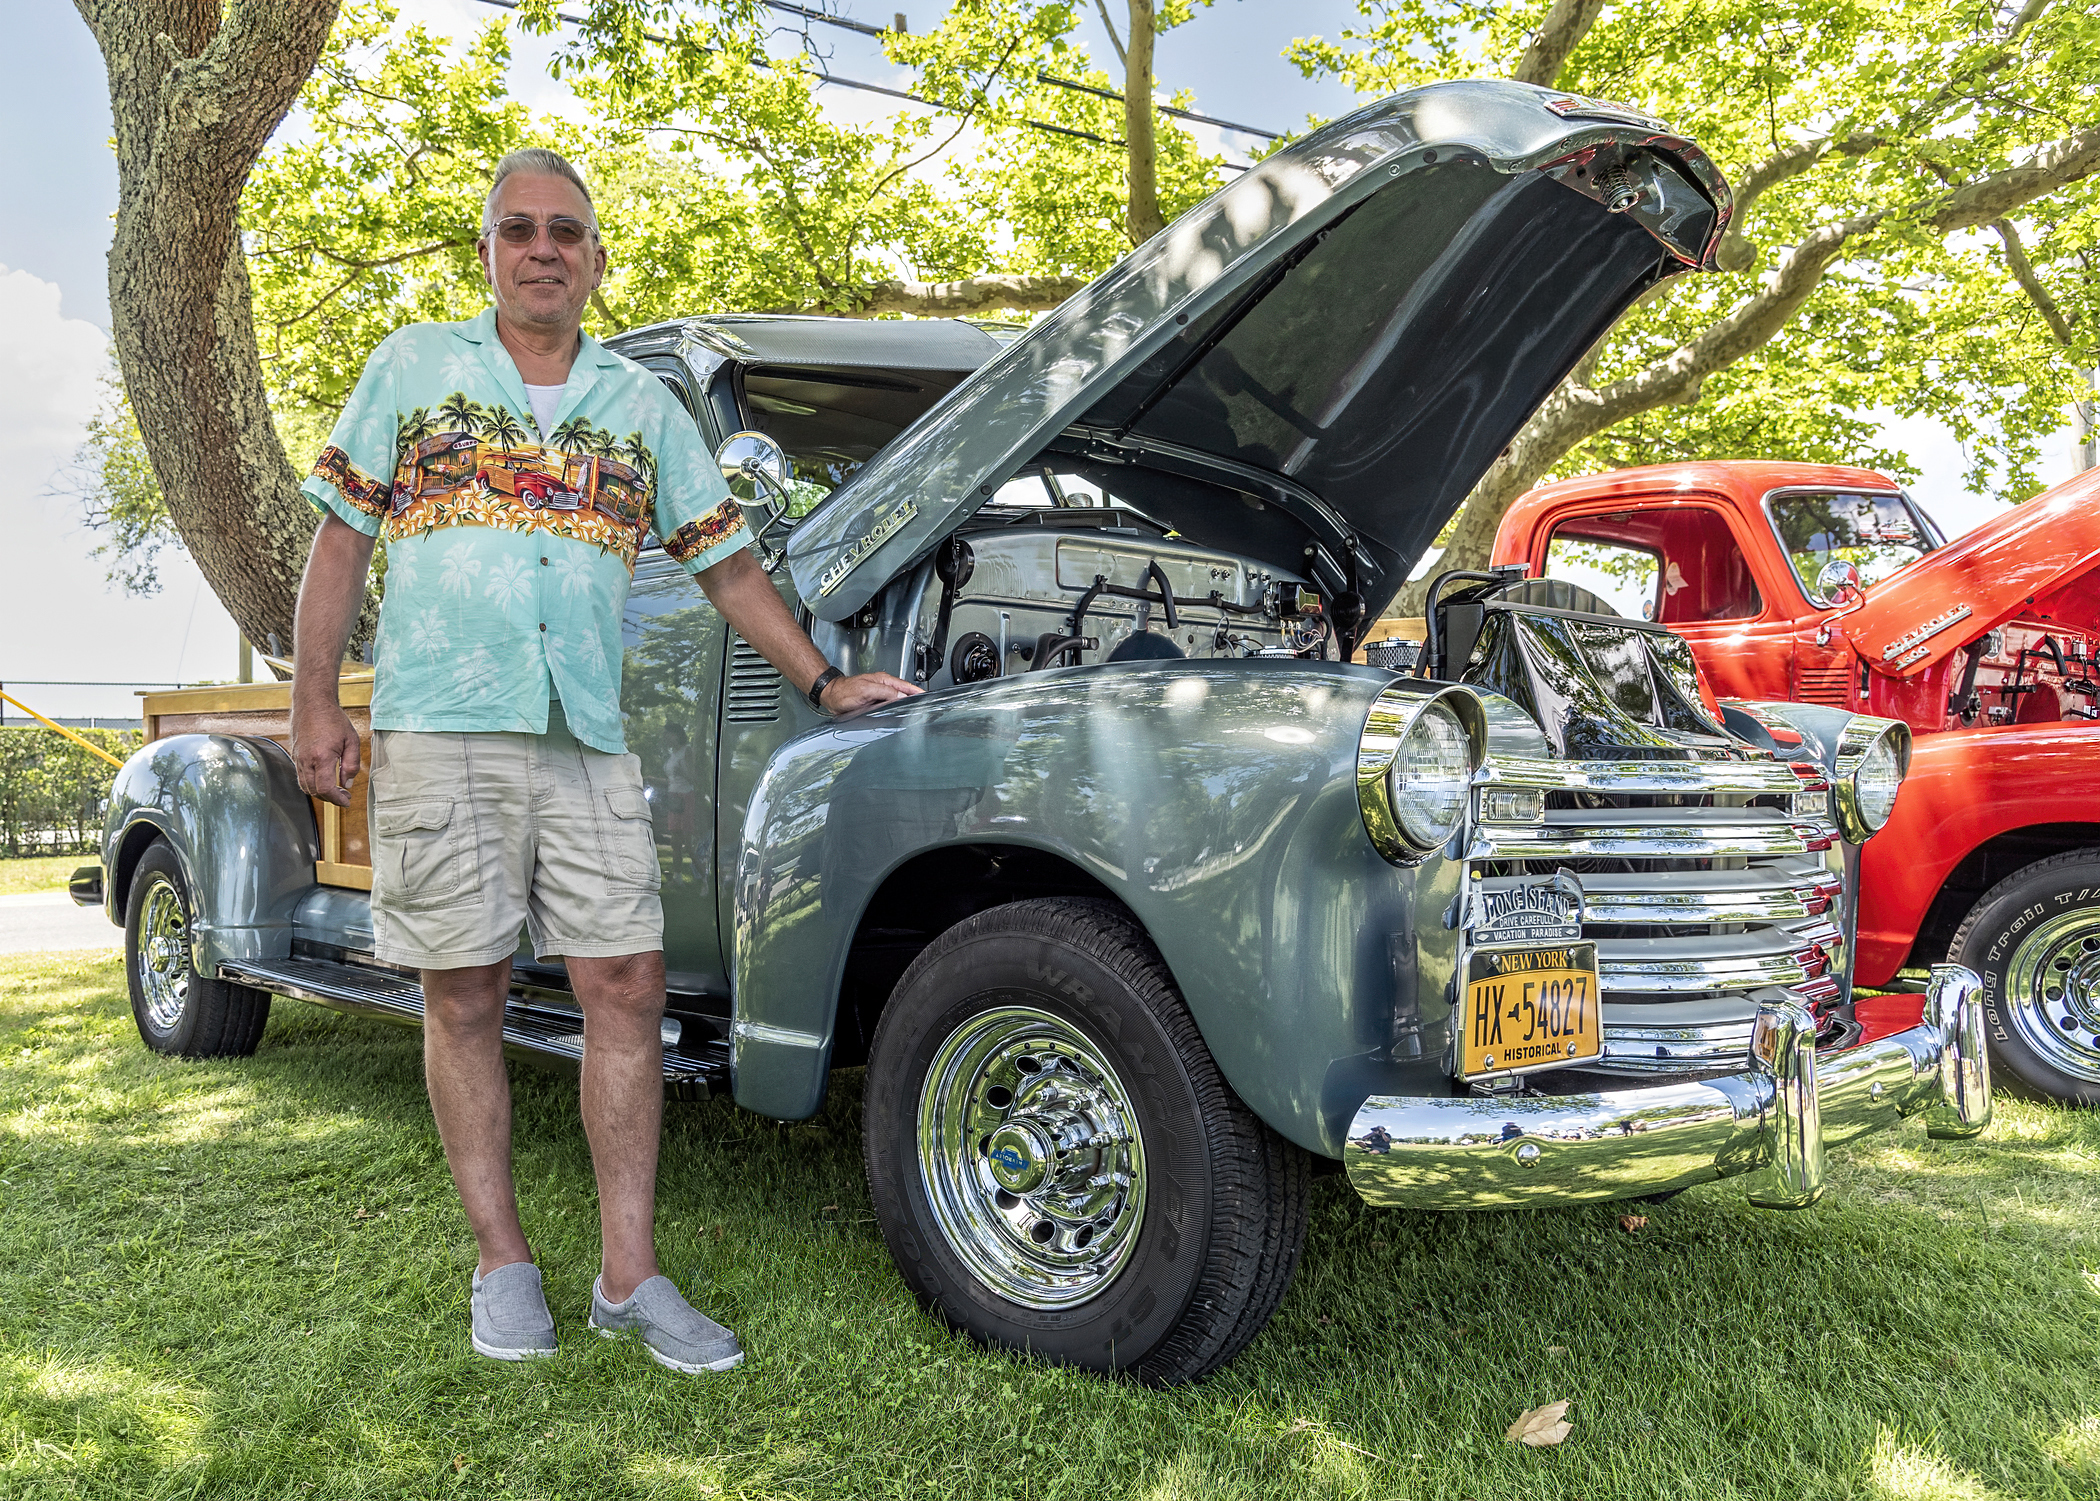 The Westhampton Beach Historical Society held an antique car show on the Great Lawn in Westhampton Beach on Saturday. Howard McCarren of East Moriches was there with his 1953 Chevrolet 3800 pickup.       Courtesy Westhampton Beach Historical Society